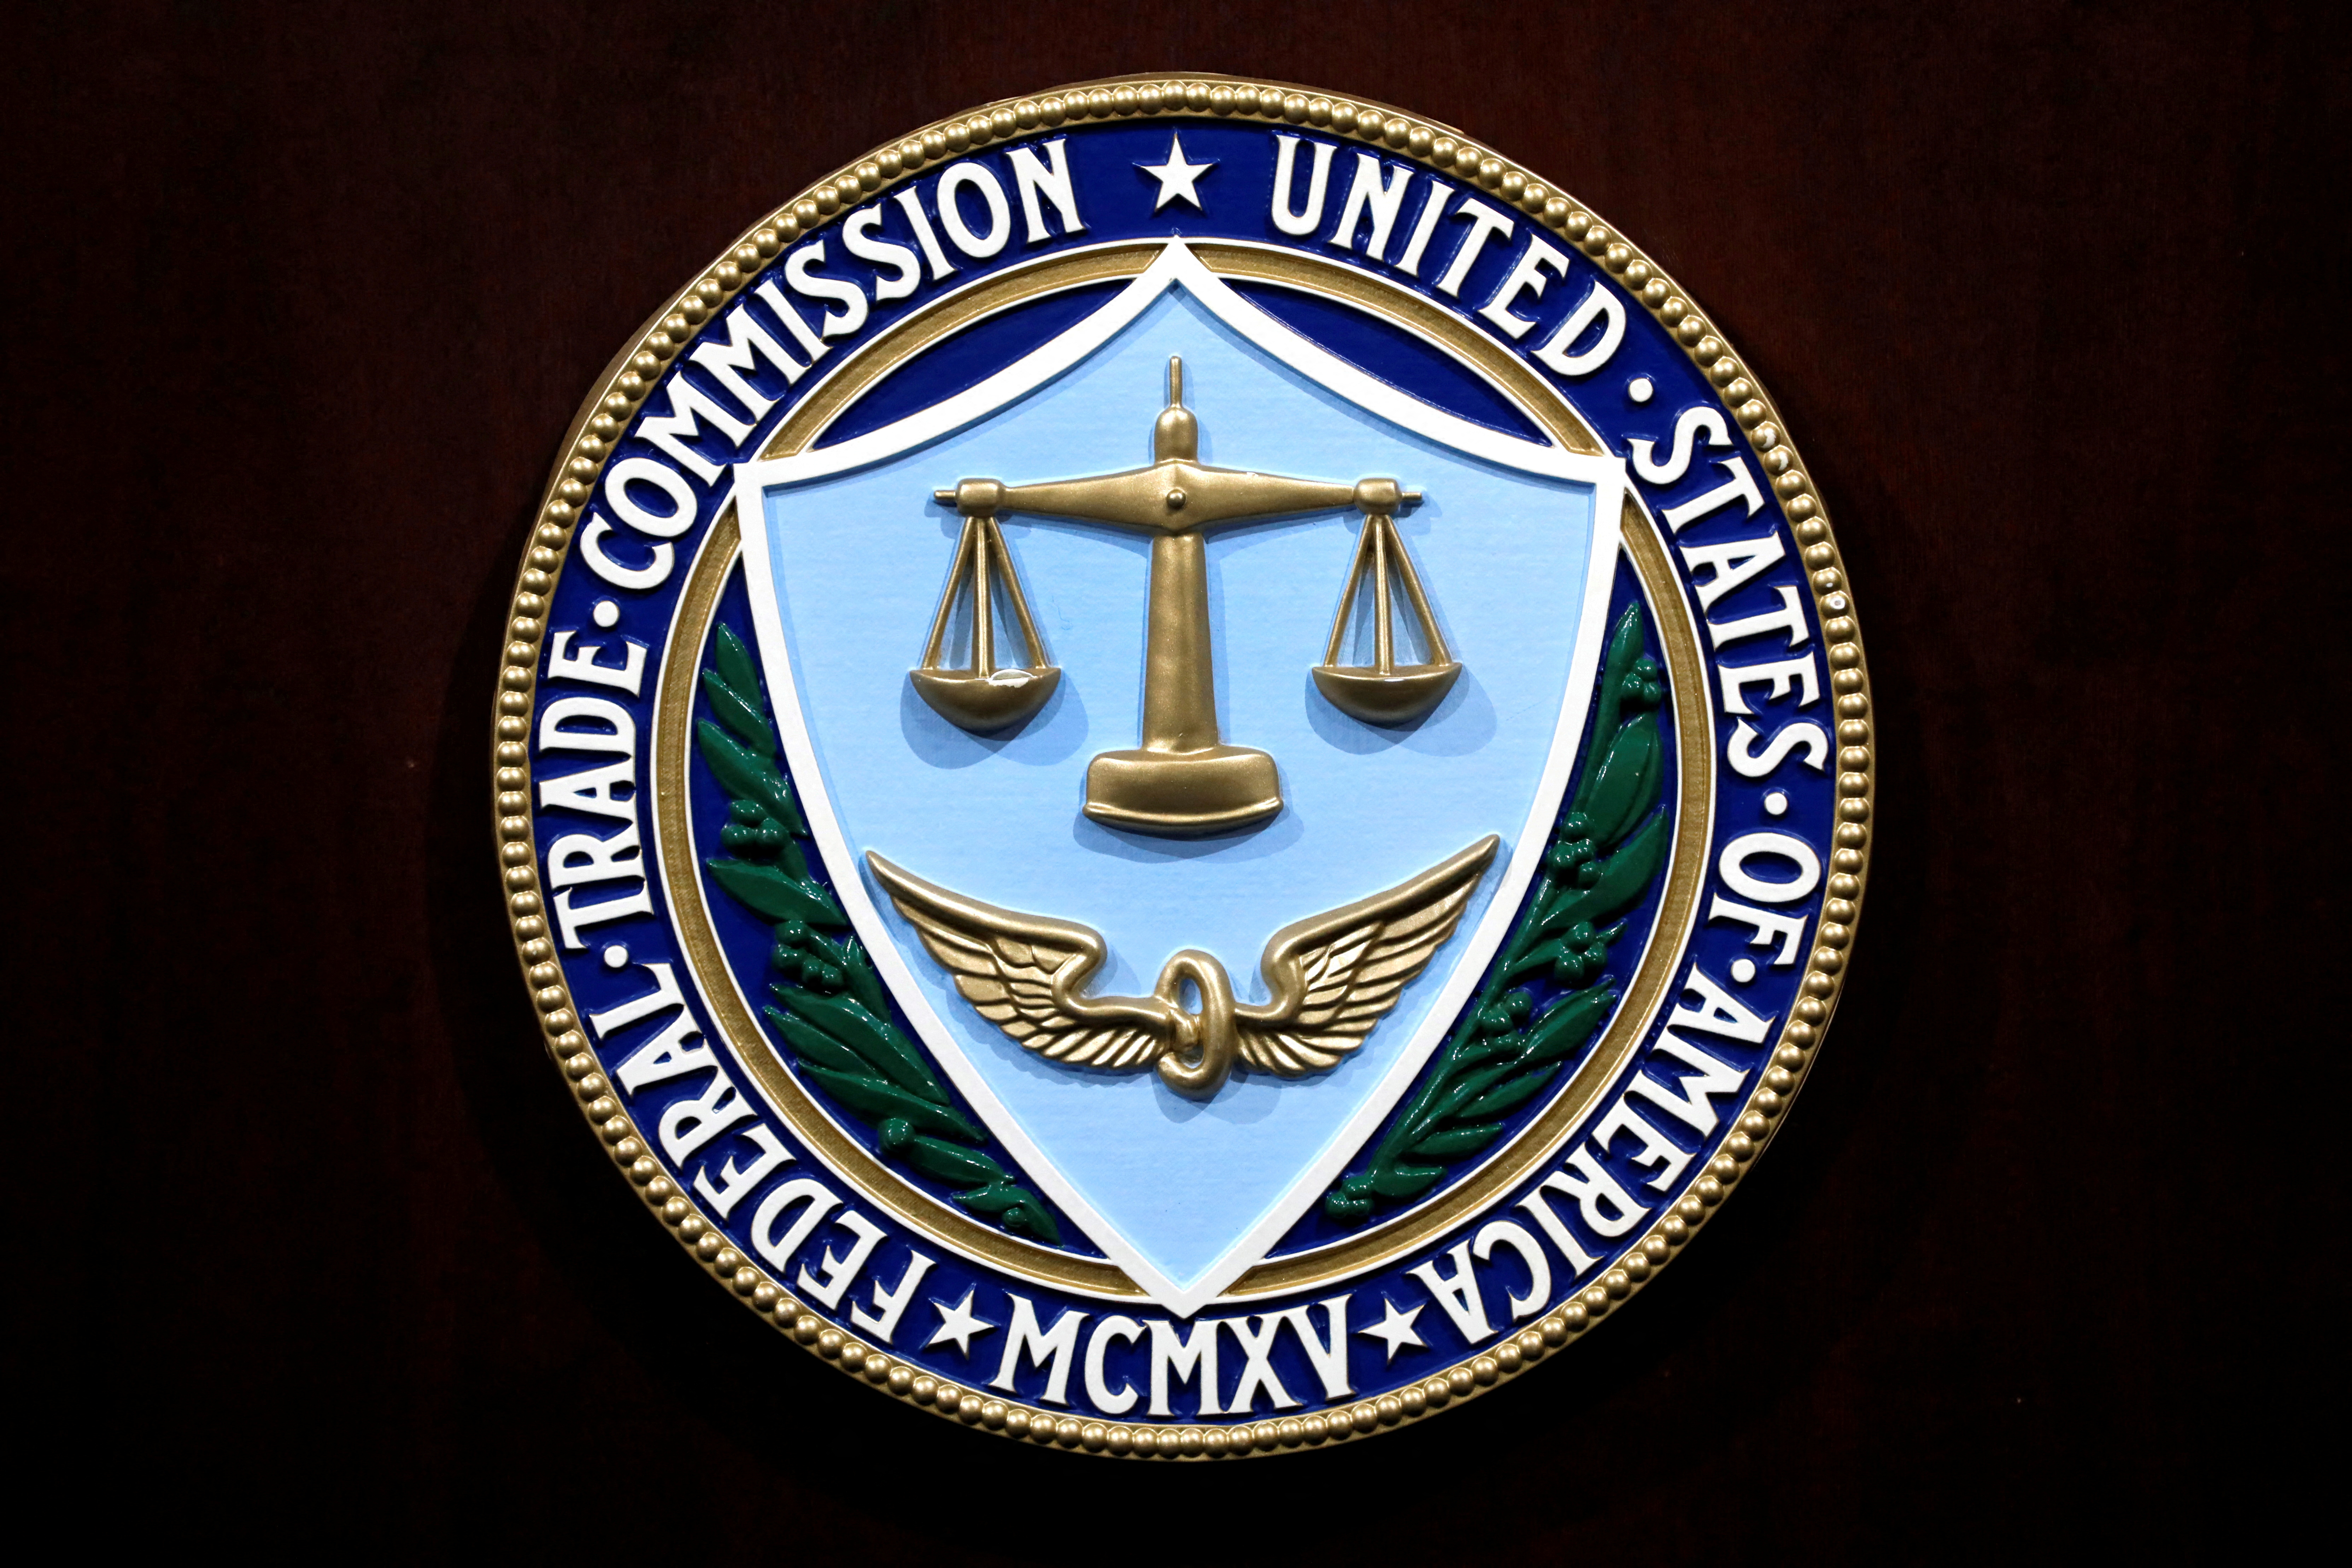 FTC seal at commission headquarters in Washington